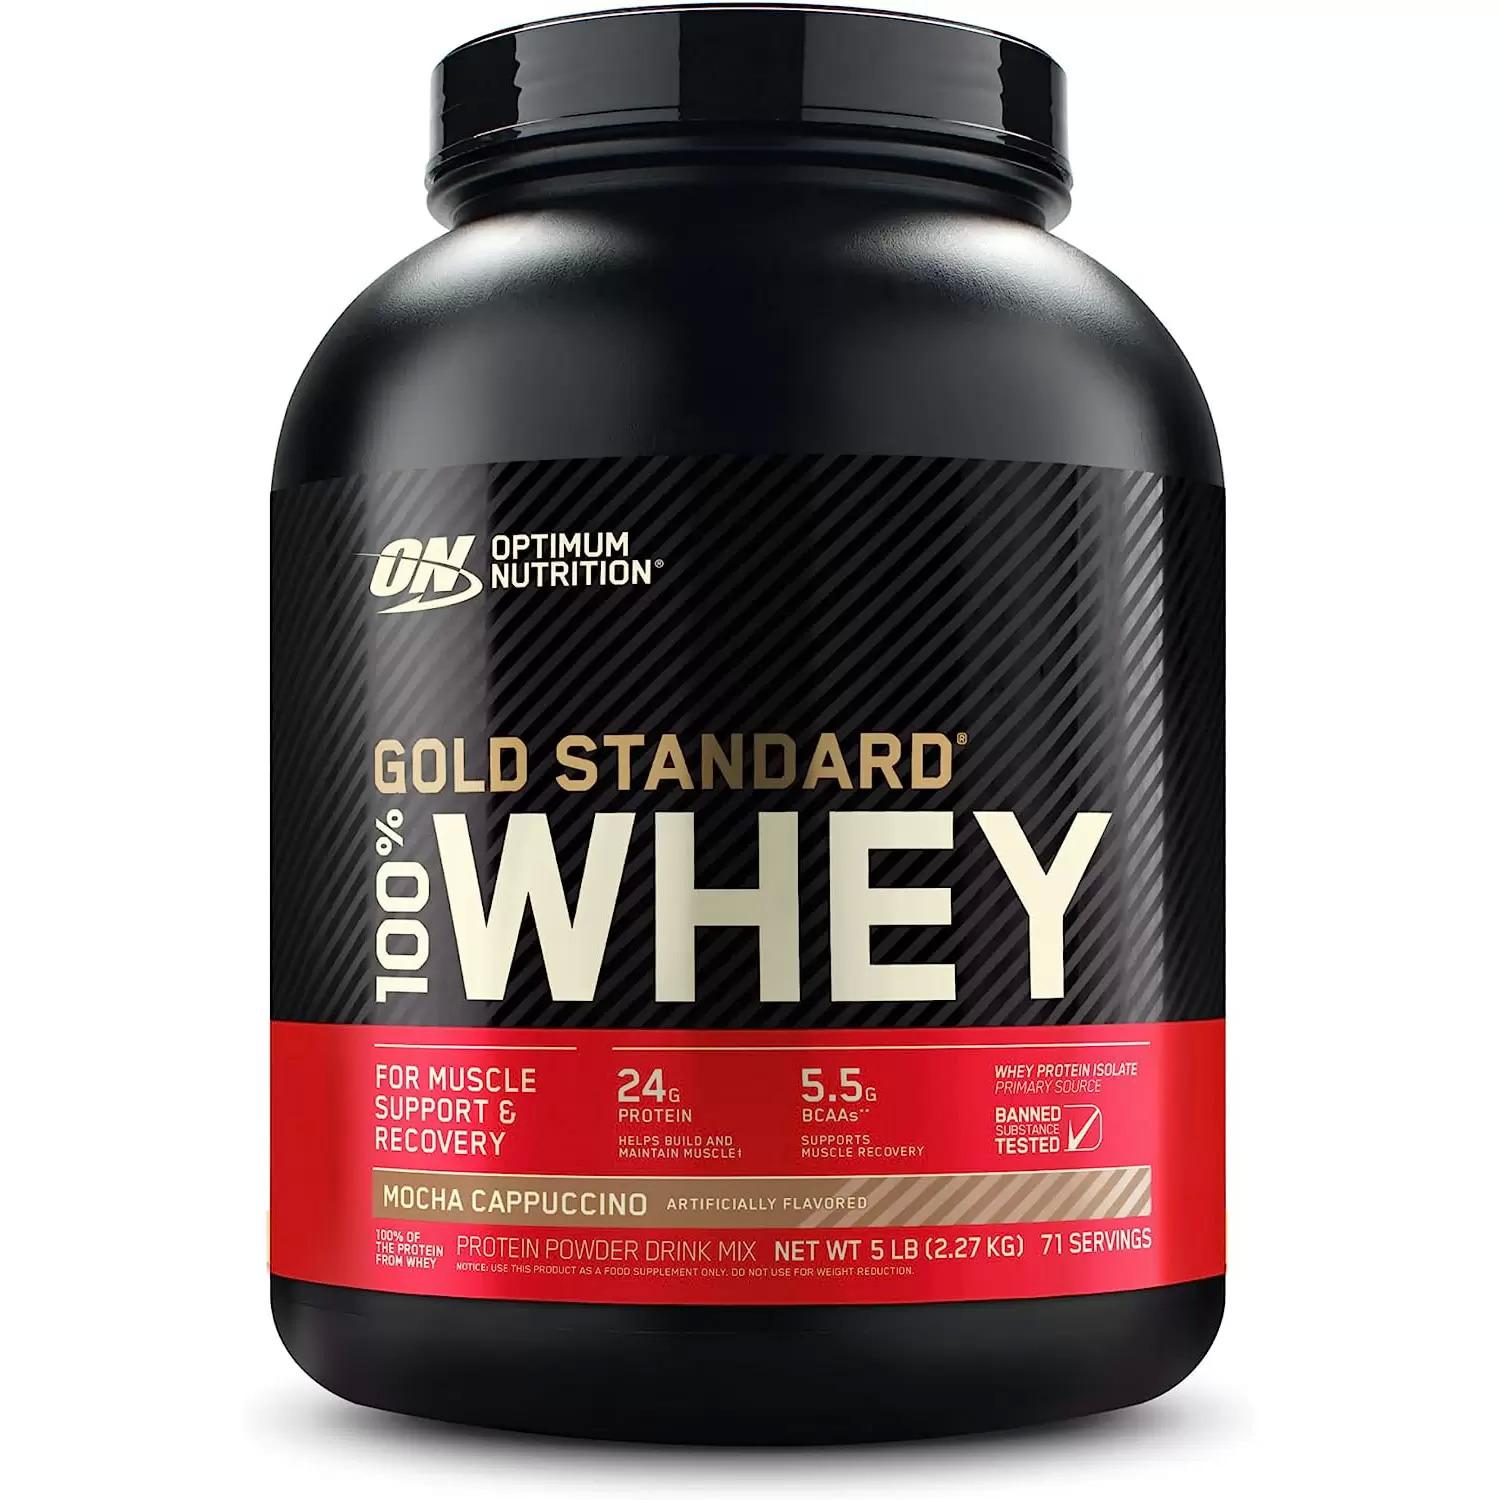 Optimum Nutrition Gold Mocha Cappuccino Whey Protein Powder 5Lbs for $44.33 Shipped